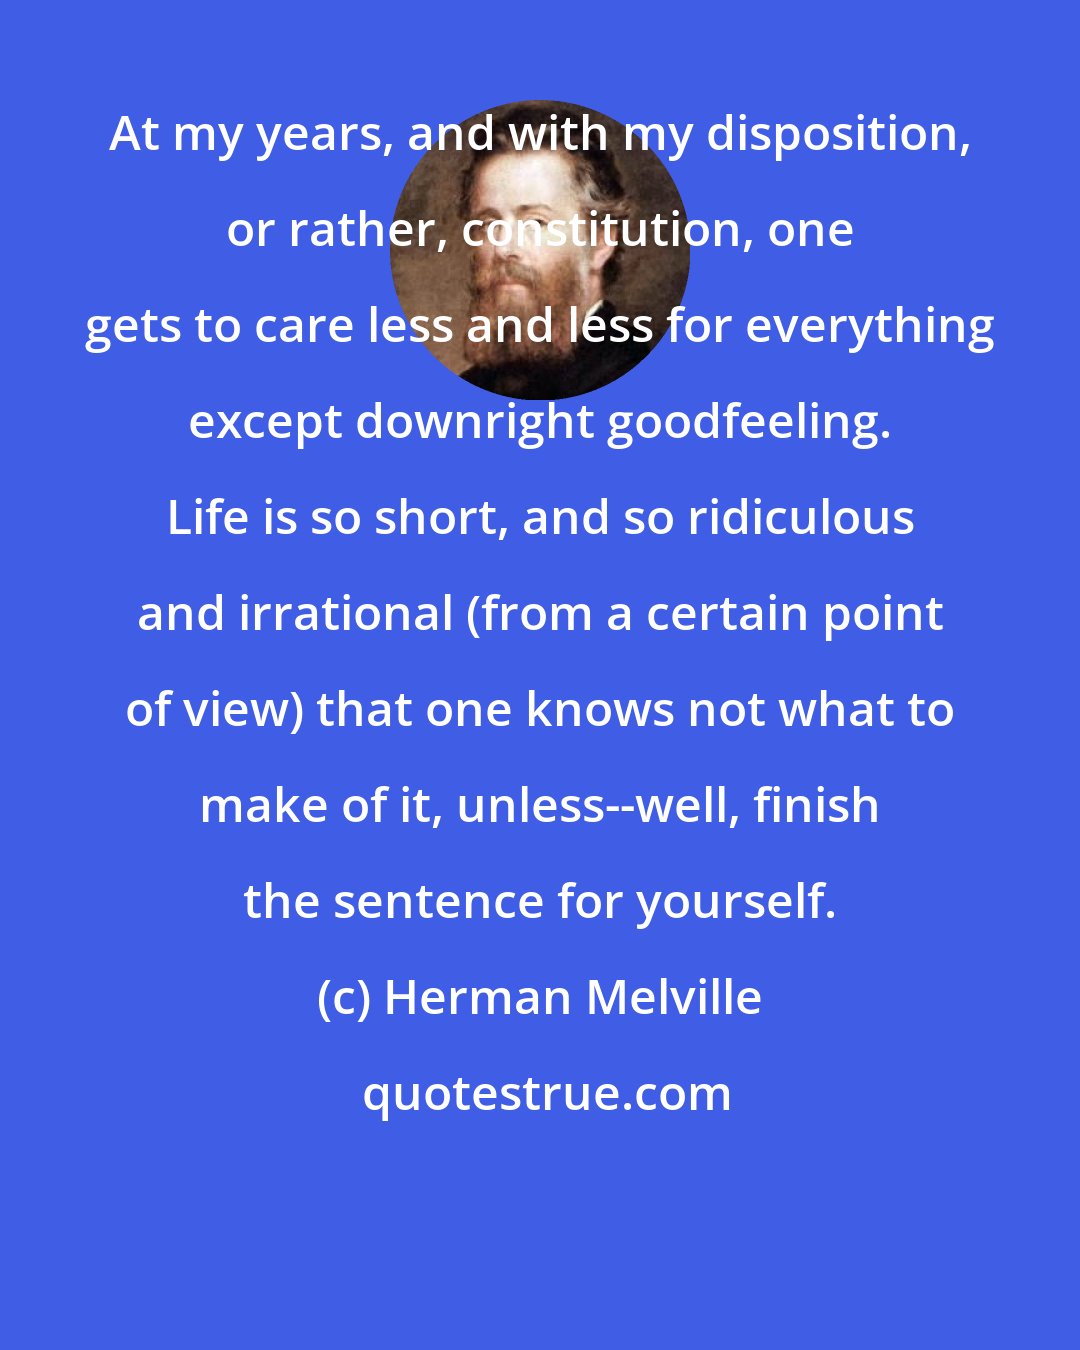 Herman Melville: At my years, and with my disposition, or rather, constitution, one gets to care less and less for everything except downright goodfeeling. Life is so short, and so ridiculous and irrational (from a certain point of view) that one knows not what to make of it, unless--well, finish the sentence for yourself.